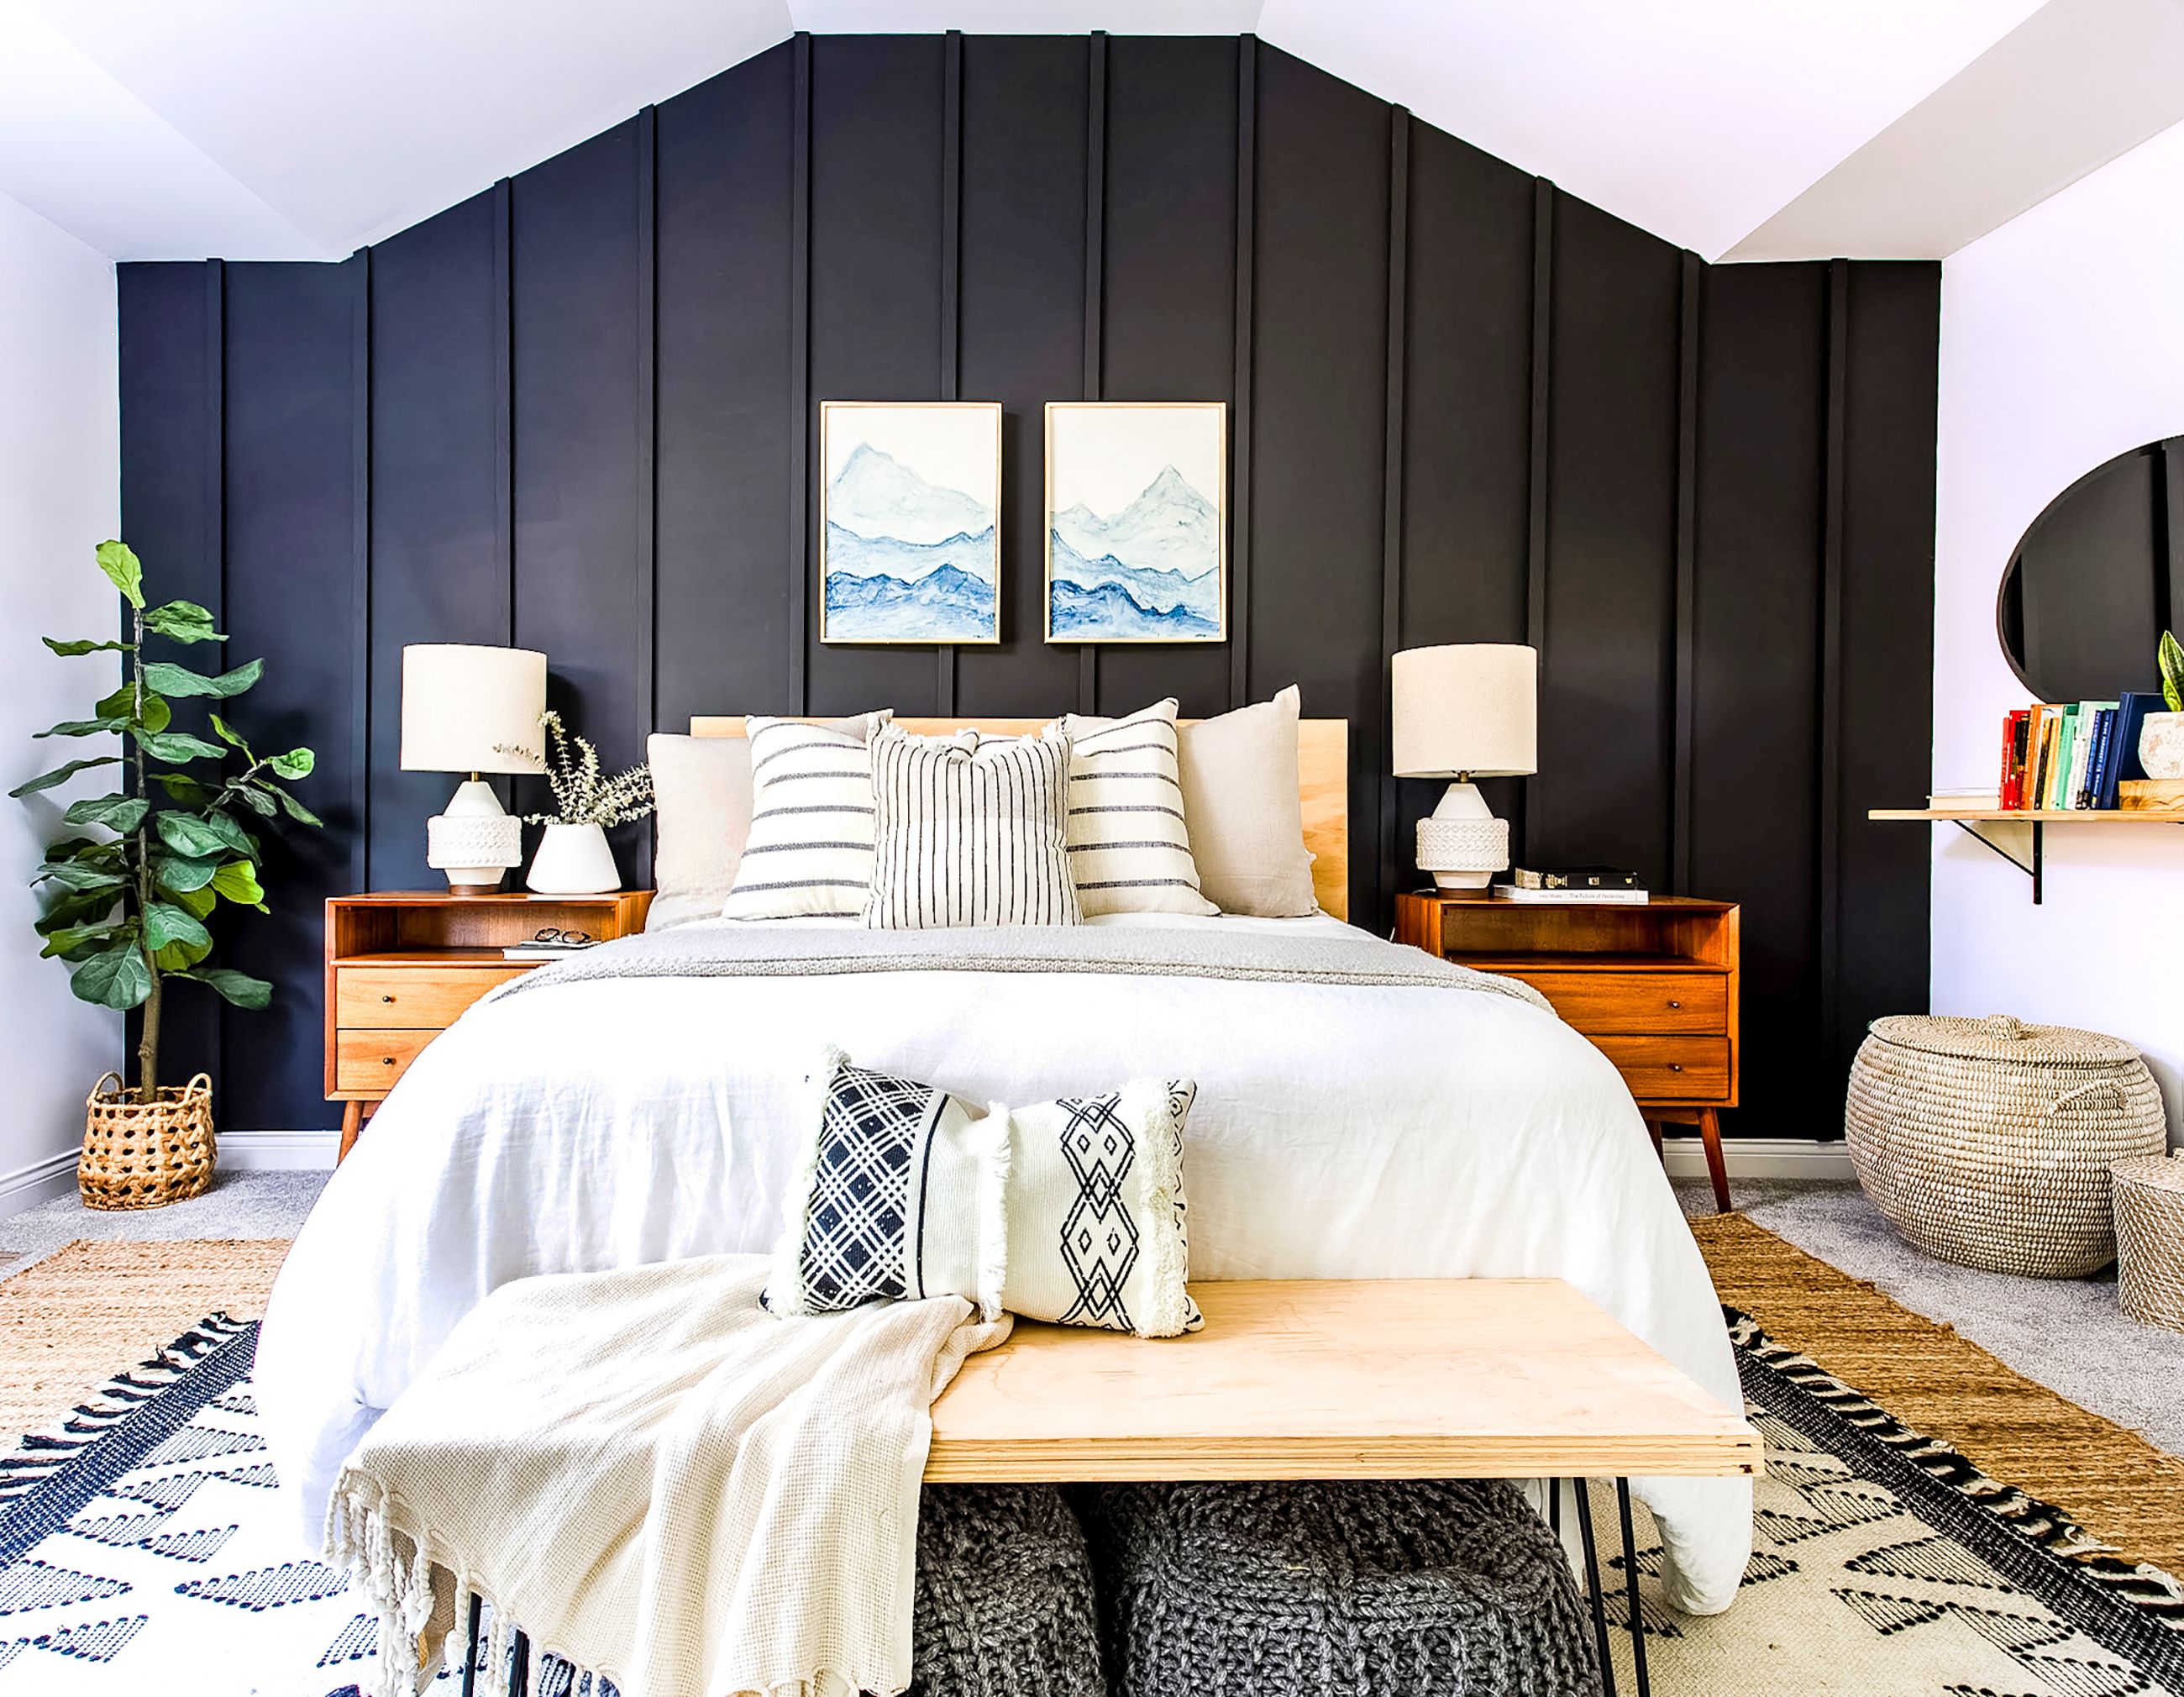 Bedroom accent wall paint ideas – 12 ways to add style and impact